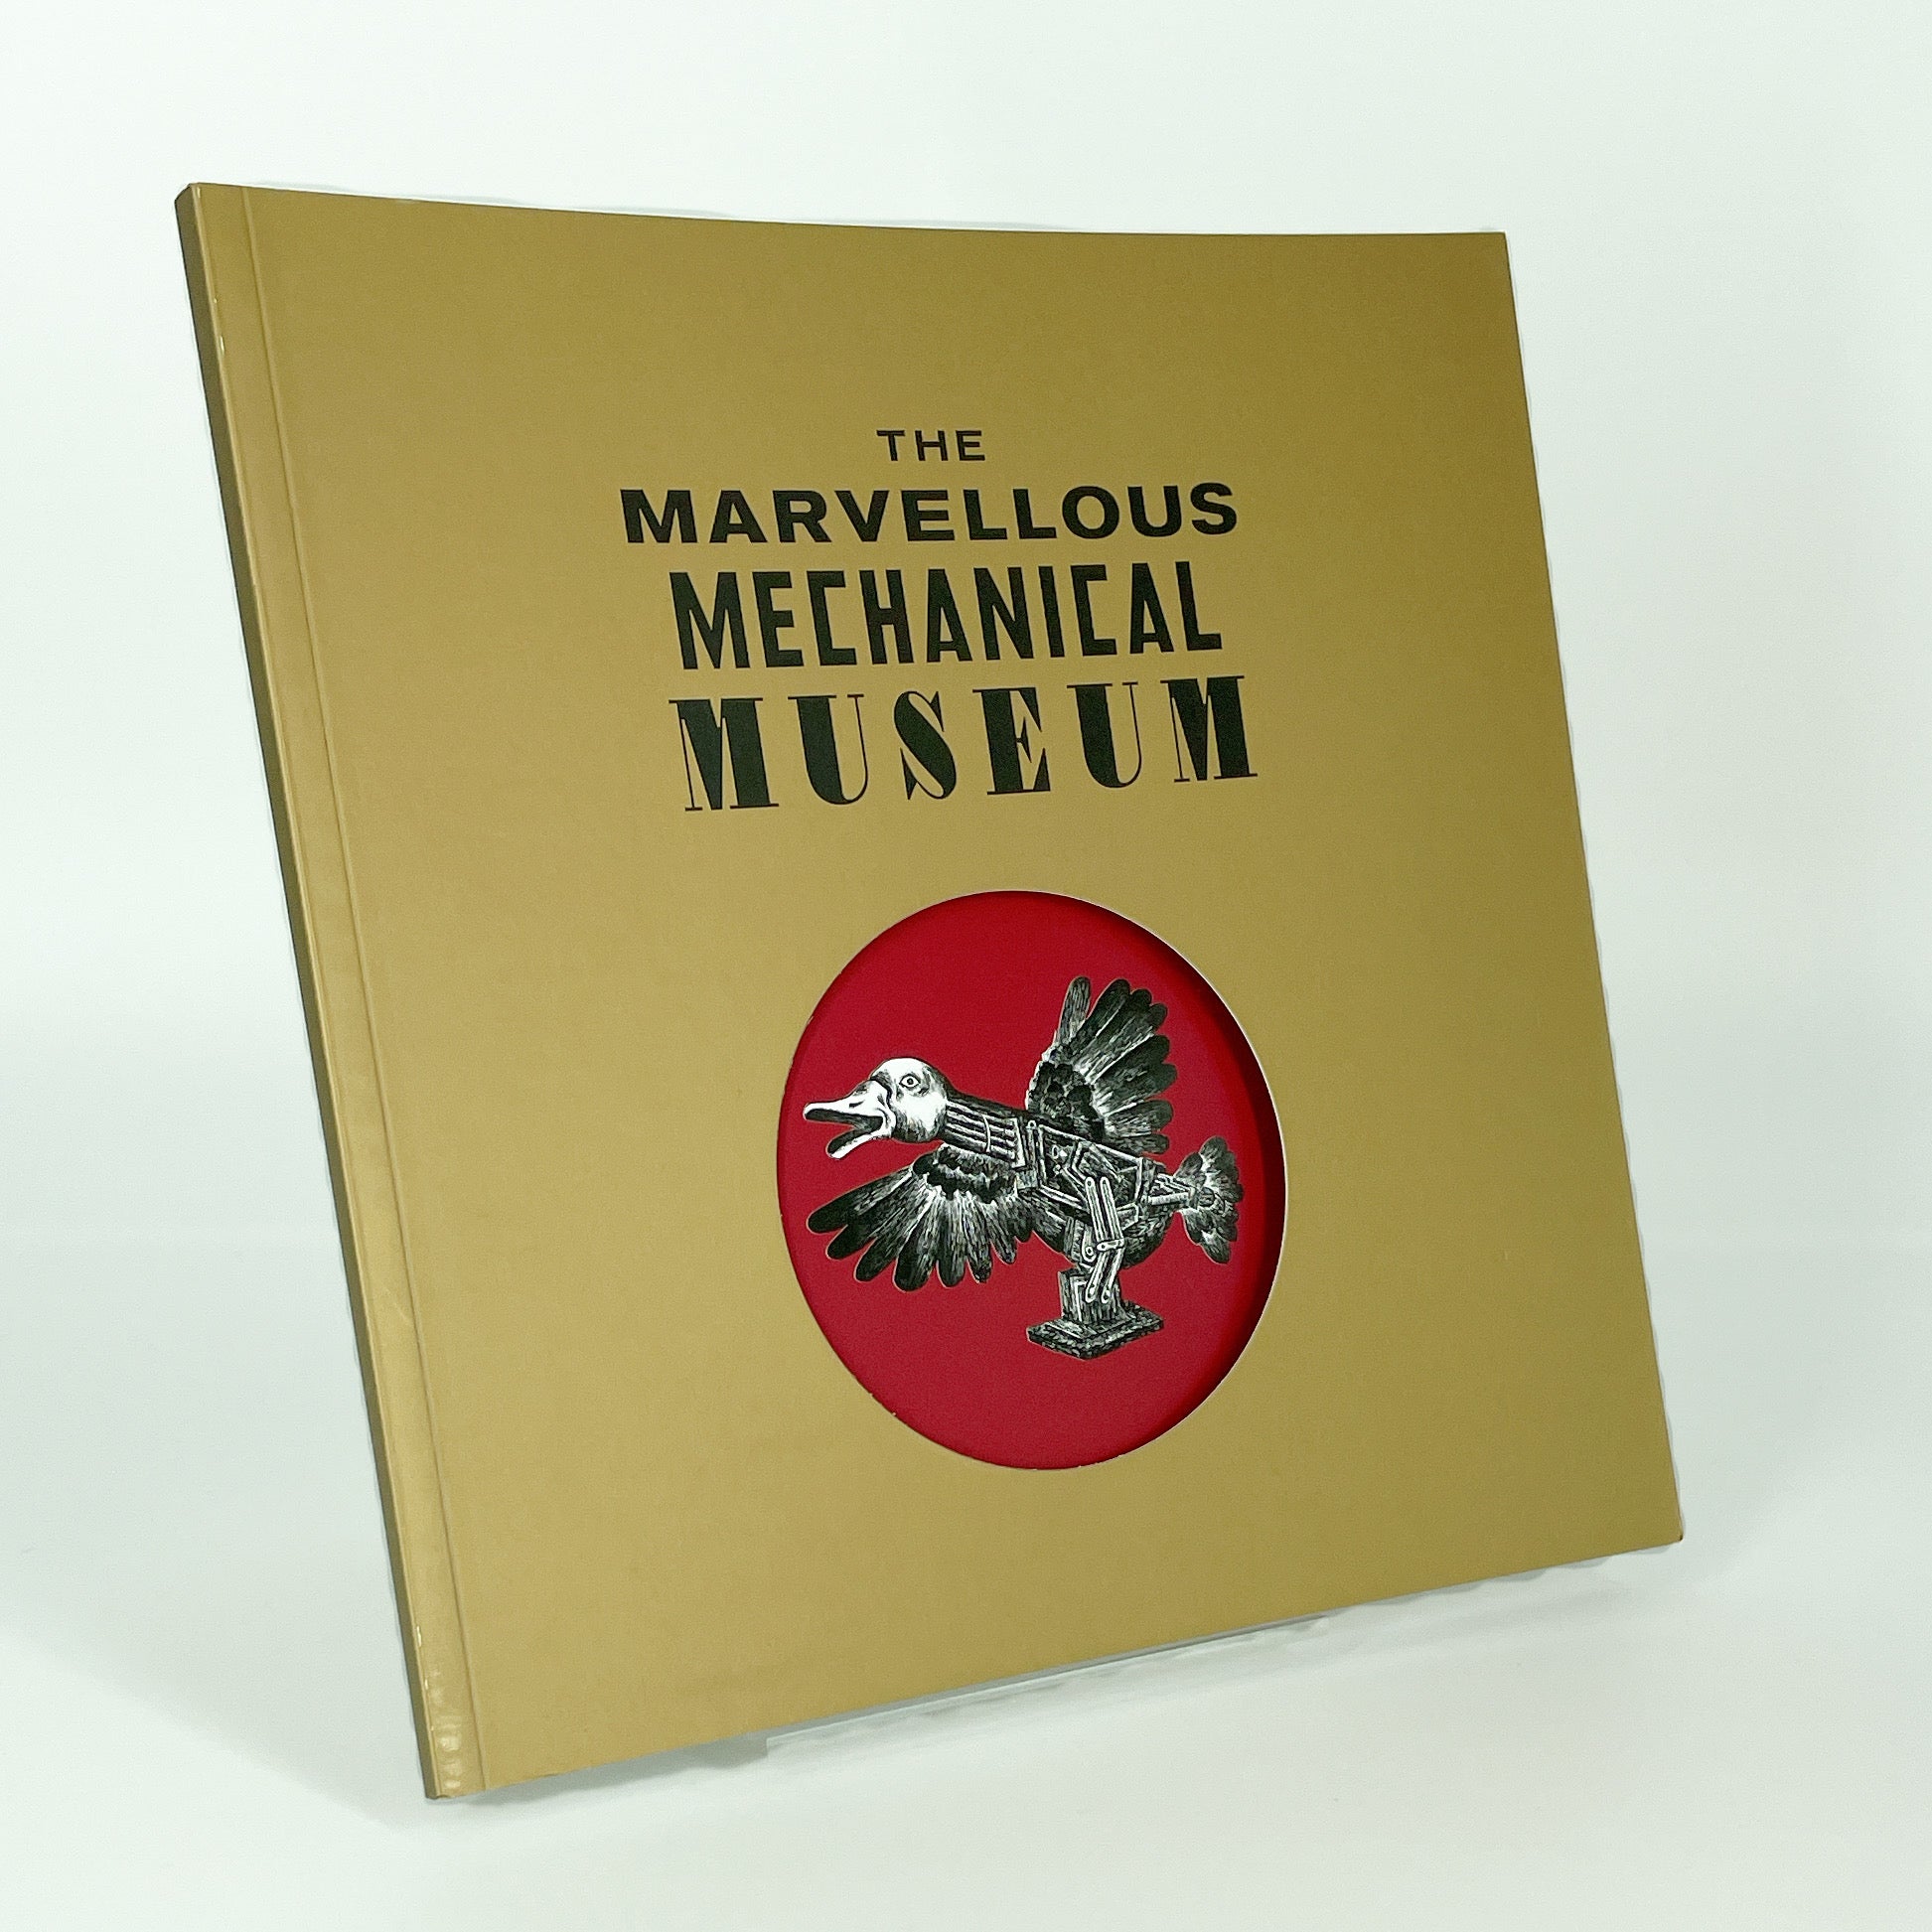 The Marvellous Mechanical Museum